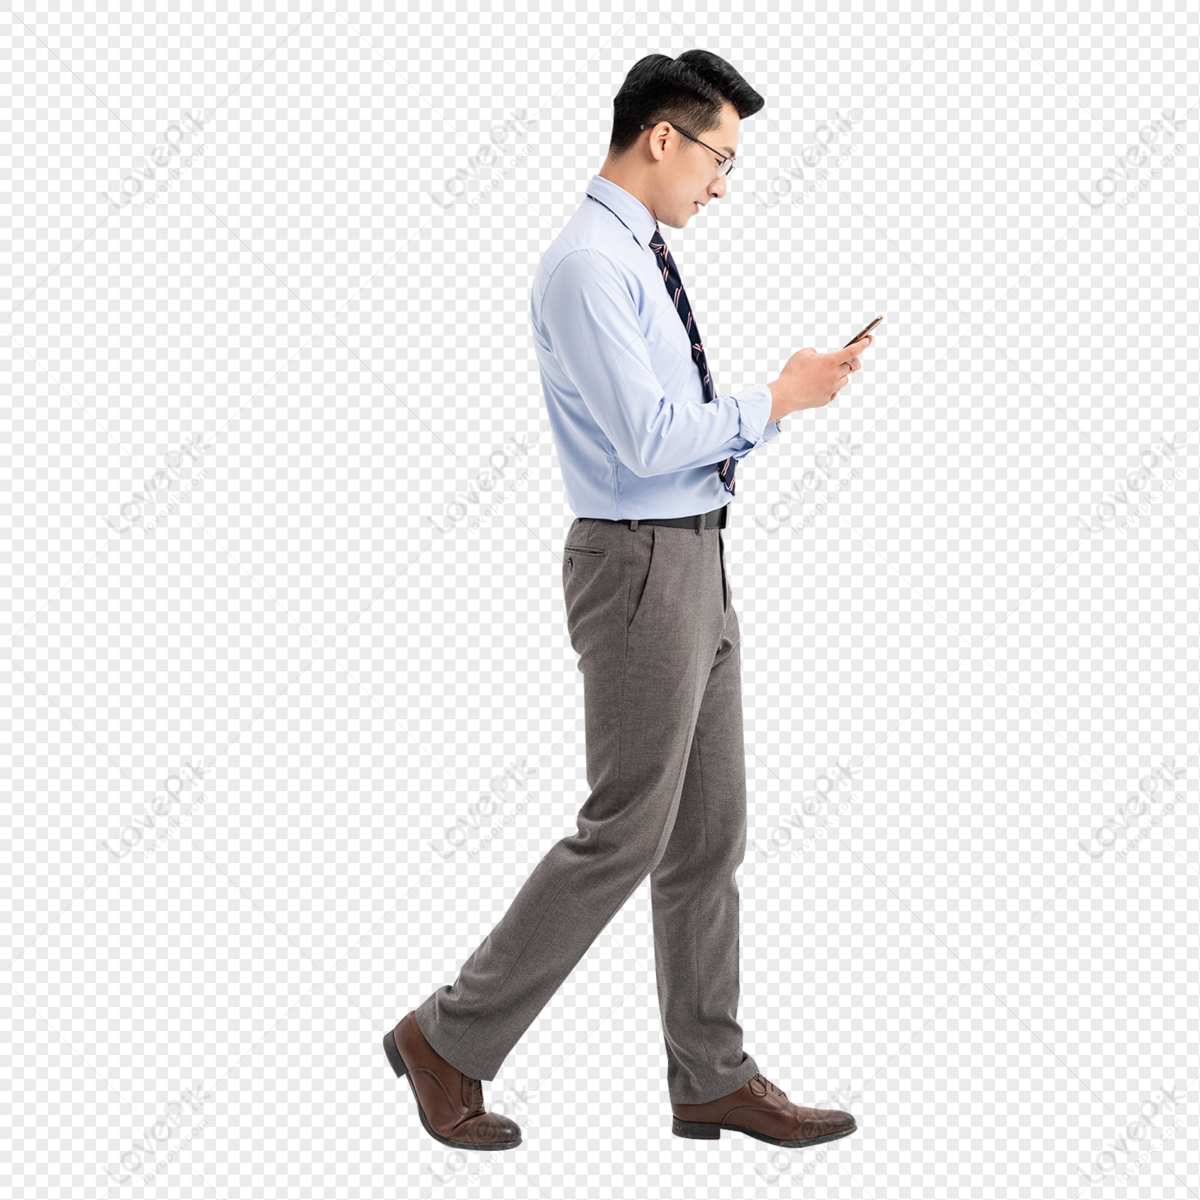 Business Man Walking PNG Images With Transparent Background | Free ...